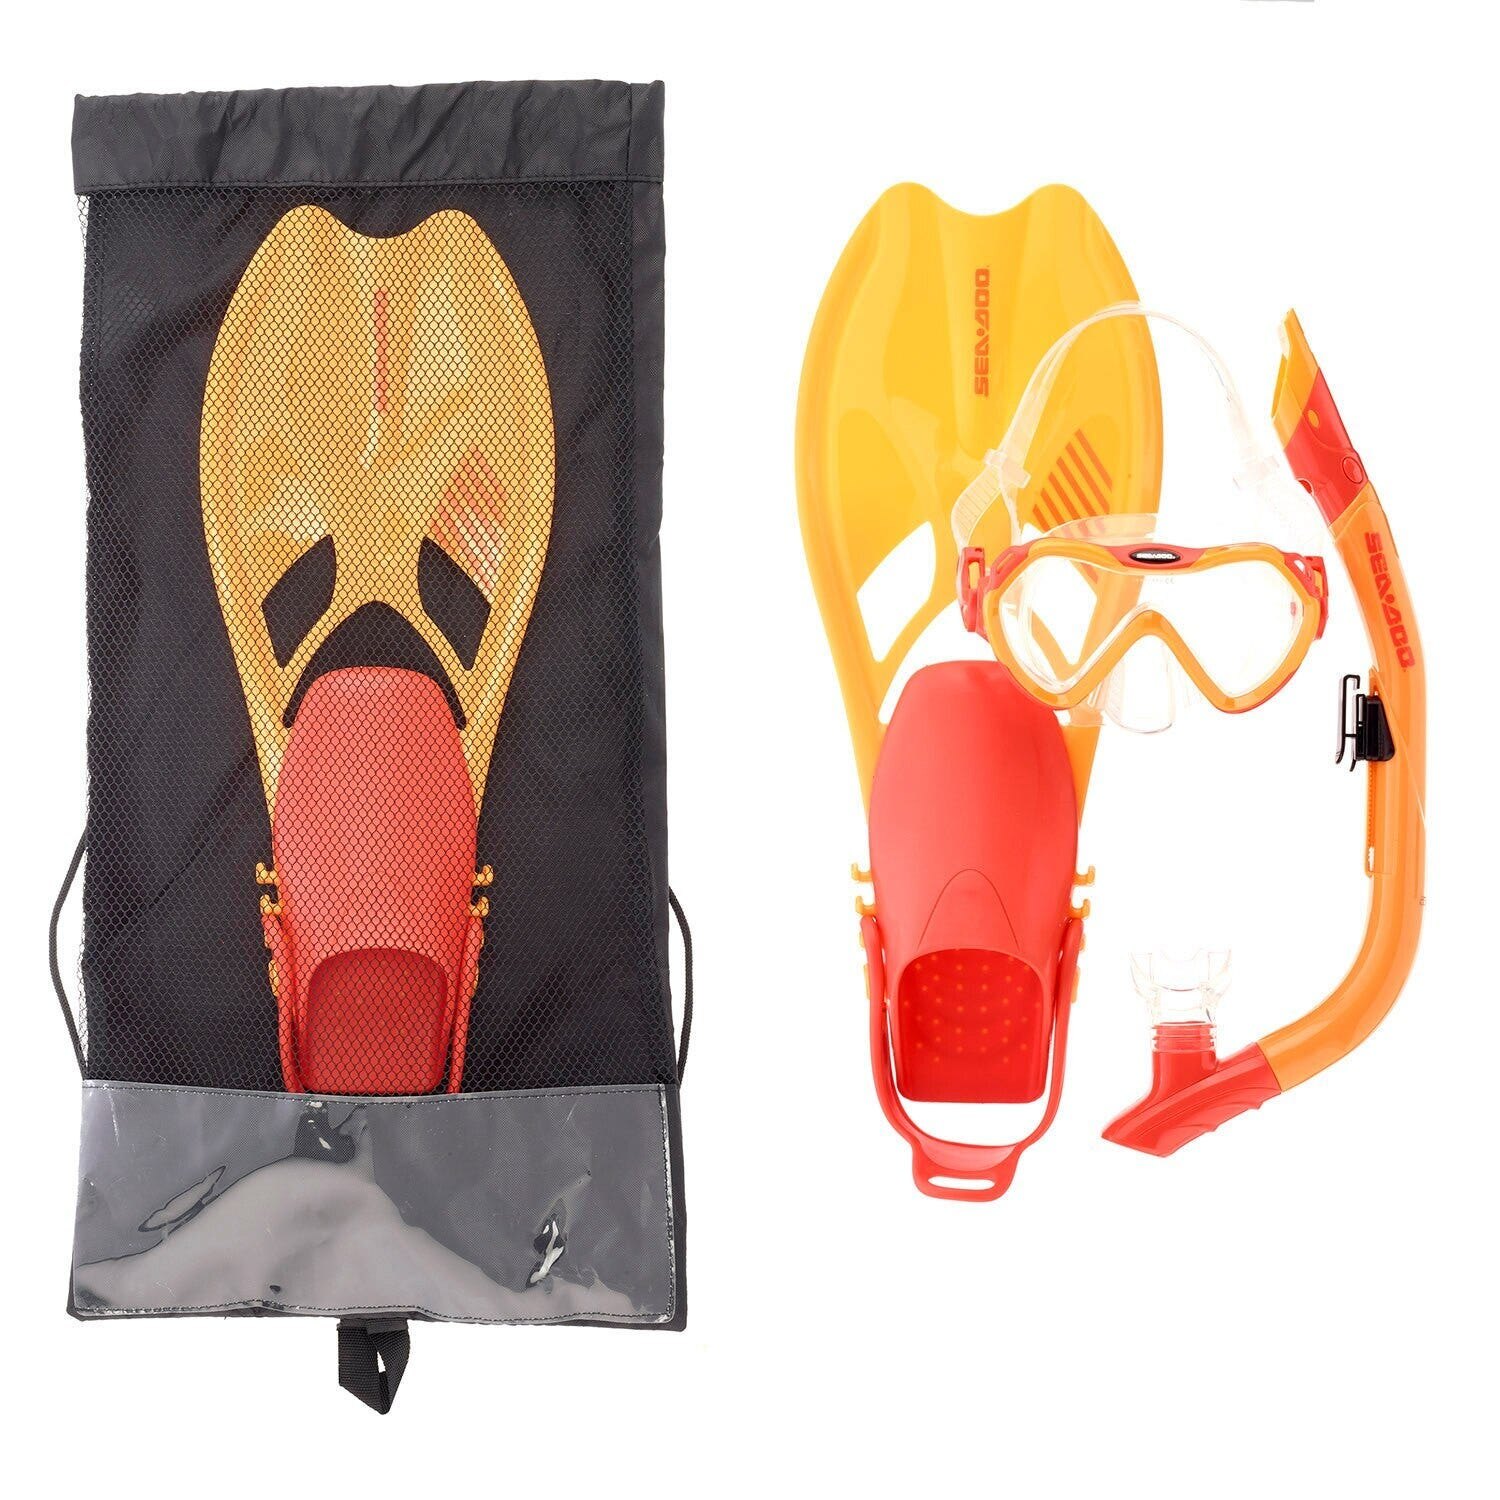 Youth Snorkeling Set 9 to 13